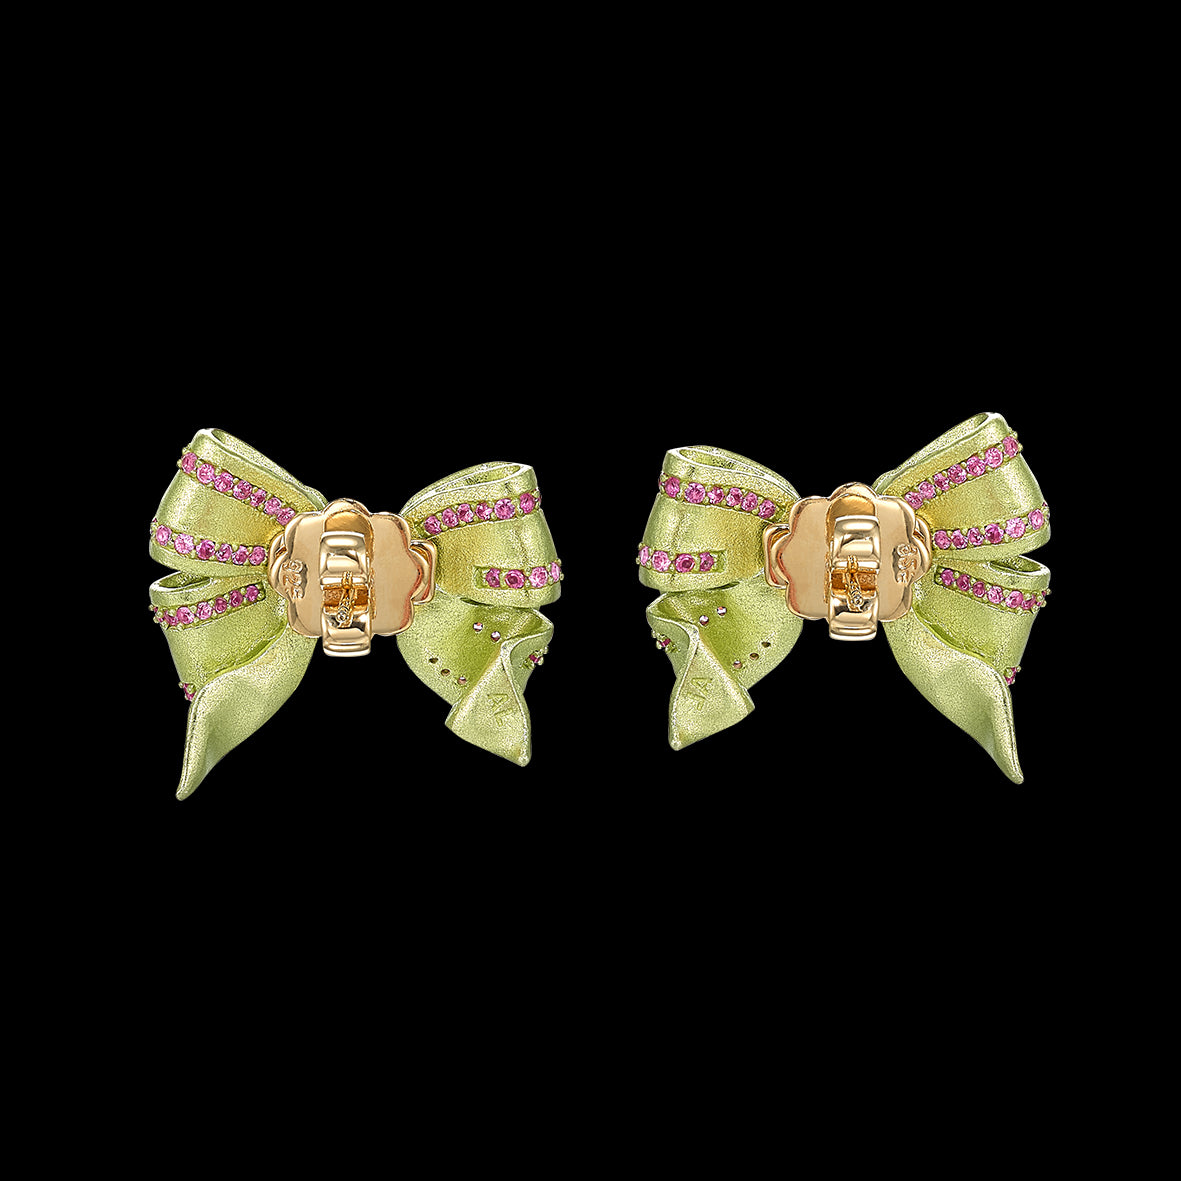 Citrus Mini Bow Tie Earrings, Earring, Anabela Chan Joaillerie - Fine jewelry with laboratory grown and created gemstones hand-crafted in the United Kingdom. Anabela Chan Joaillerie is the first fine jewellery brand in the world to champion laboratory-grown and created gemstones with high jewellery design, artisanal craftsmanship and a focus on ethical and sustainable innovations.